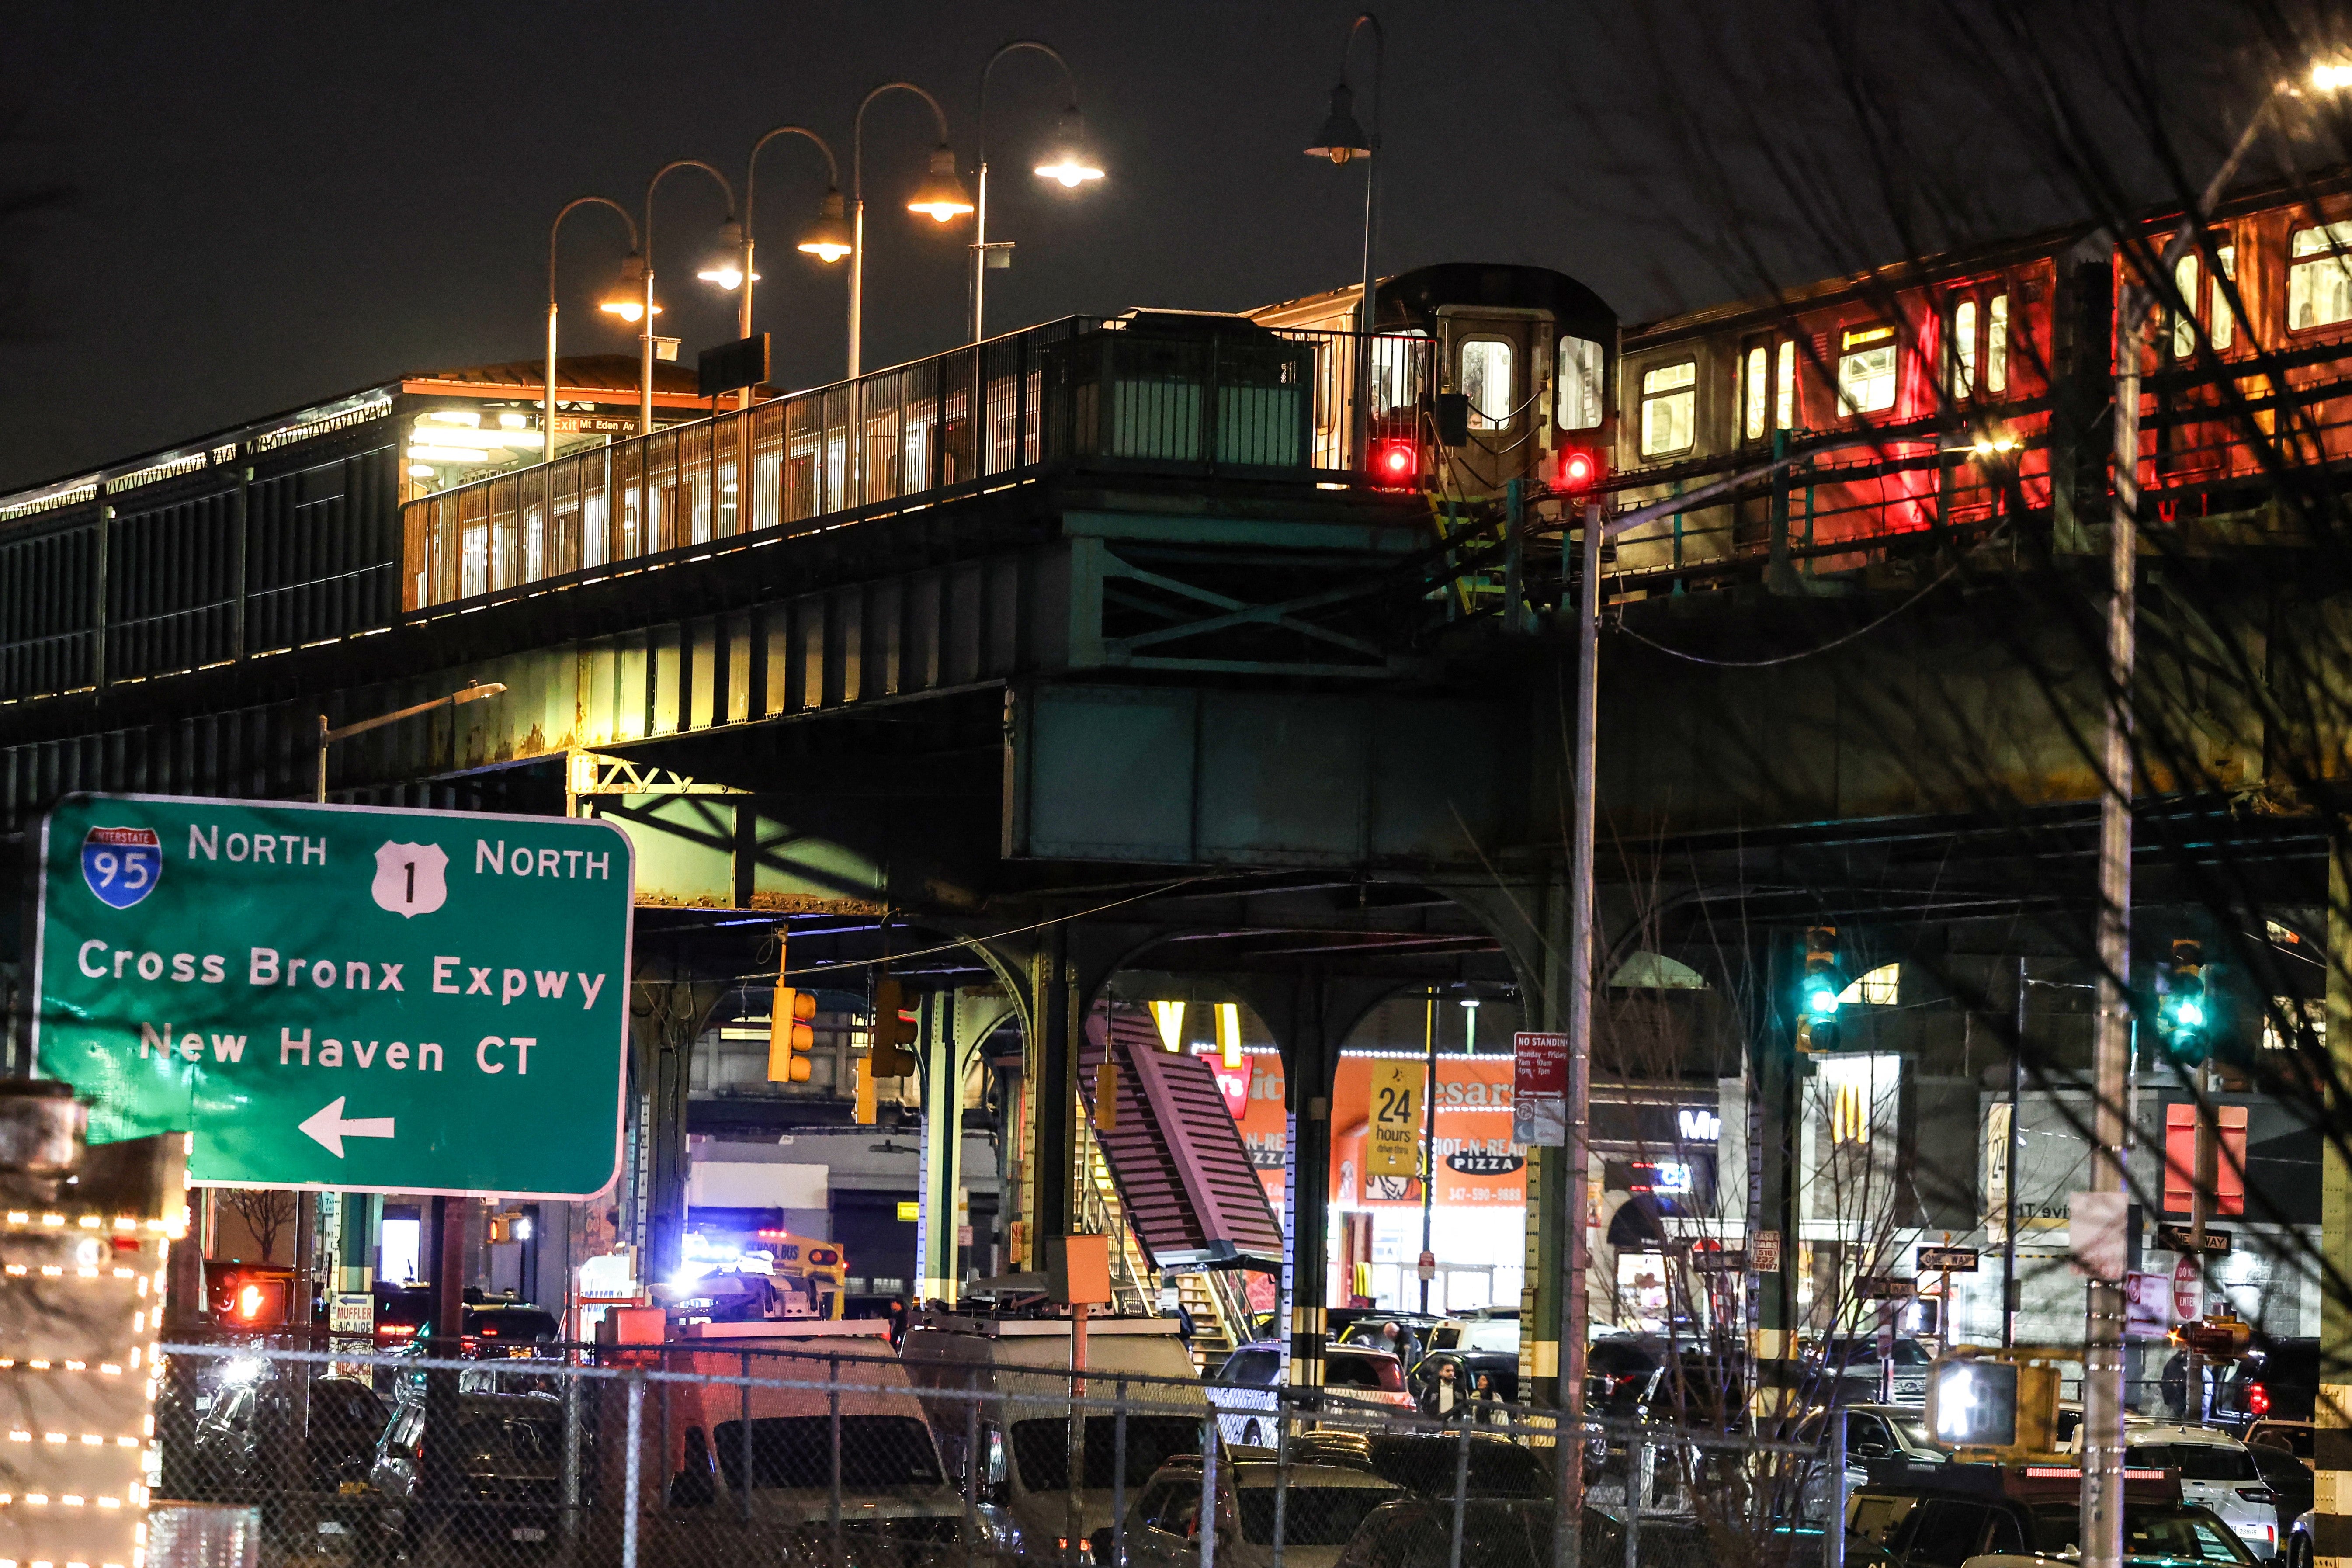 A train stands at the Mt Eden Avenue subway station in the Bronx borough of New York after six people were injured with one person in critical condition following a shooting at the subway station